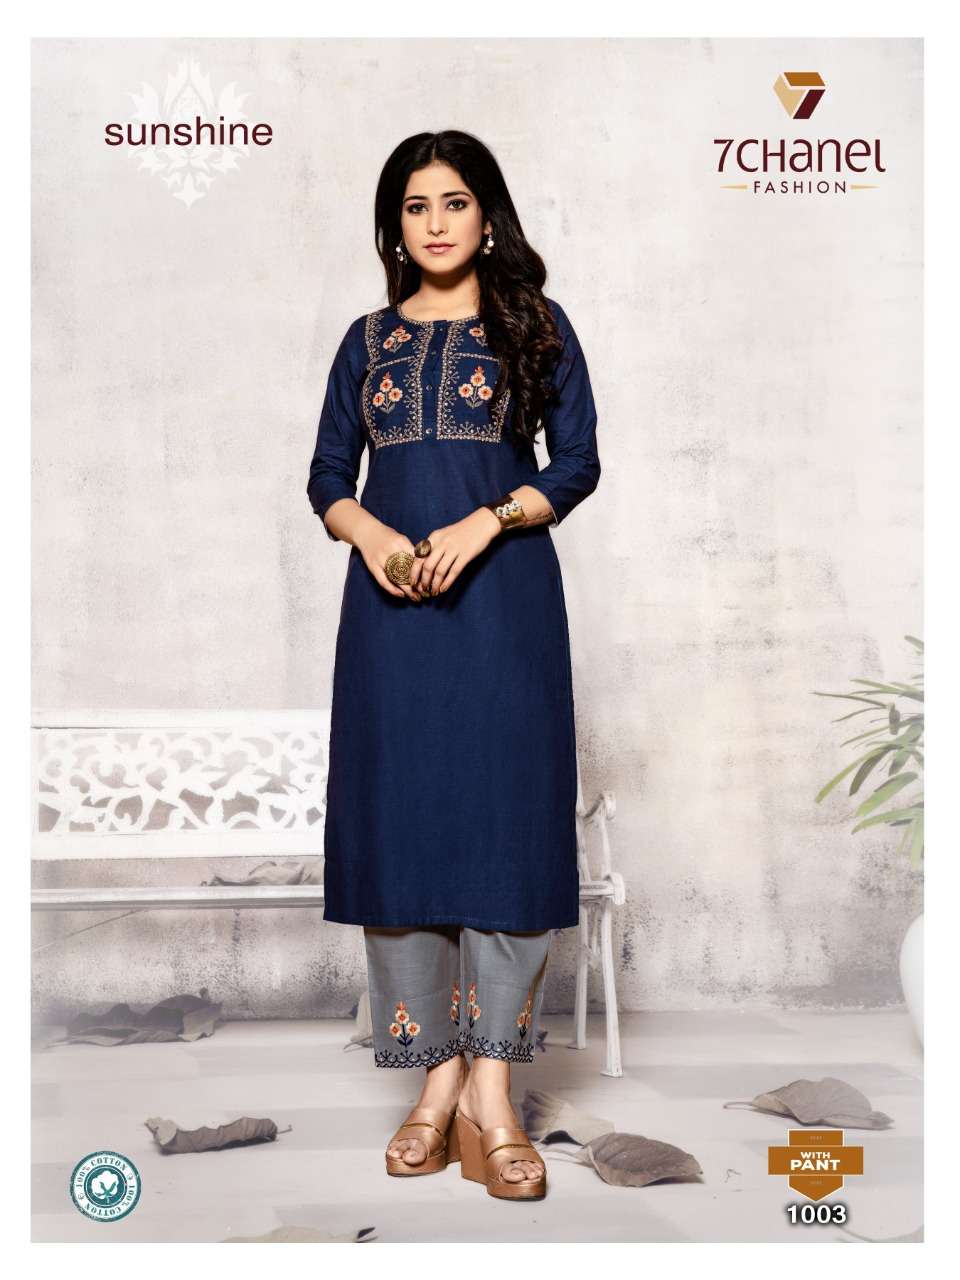 SUNSHINE WITH PANTS BY 7 CHANEL 1001 TO 1004 SERIES BEAUTIFUL STYLISH FANCY COLORFUL CASUAL WEAR & ETHNIC WEAR PURE COTTON PRINTED KURTIS AT WHOLESALE PRICE